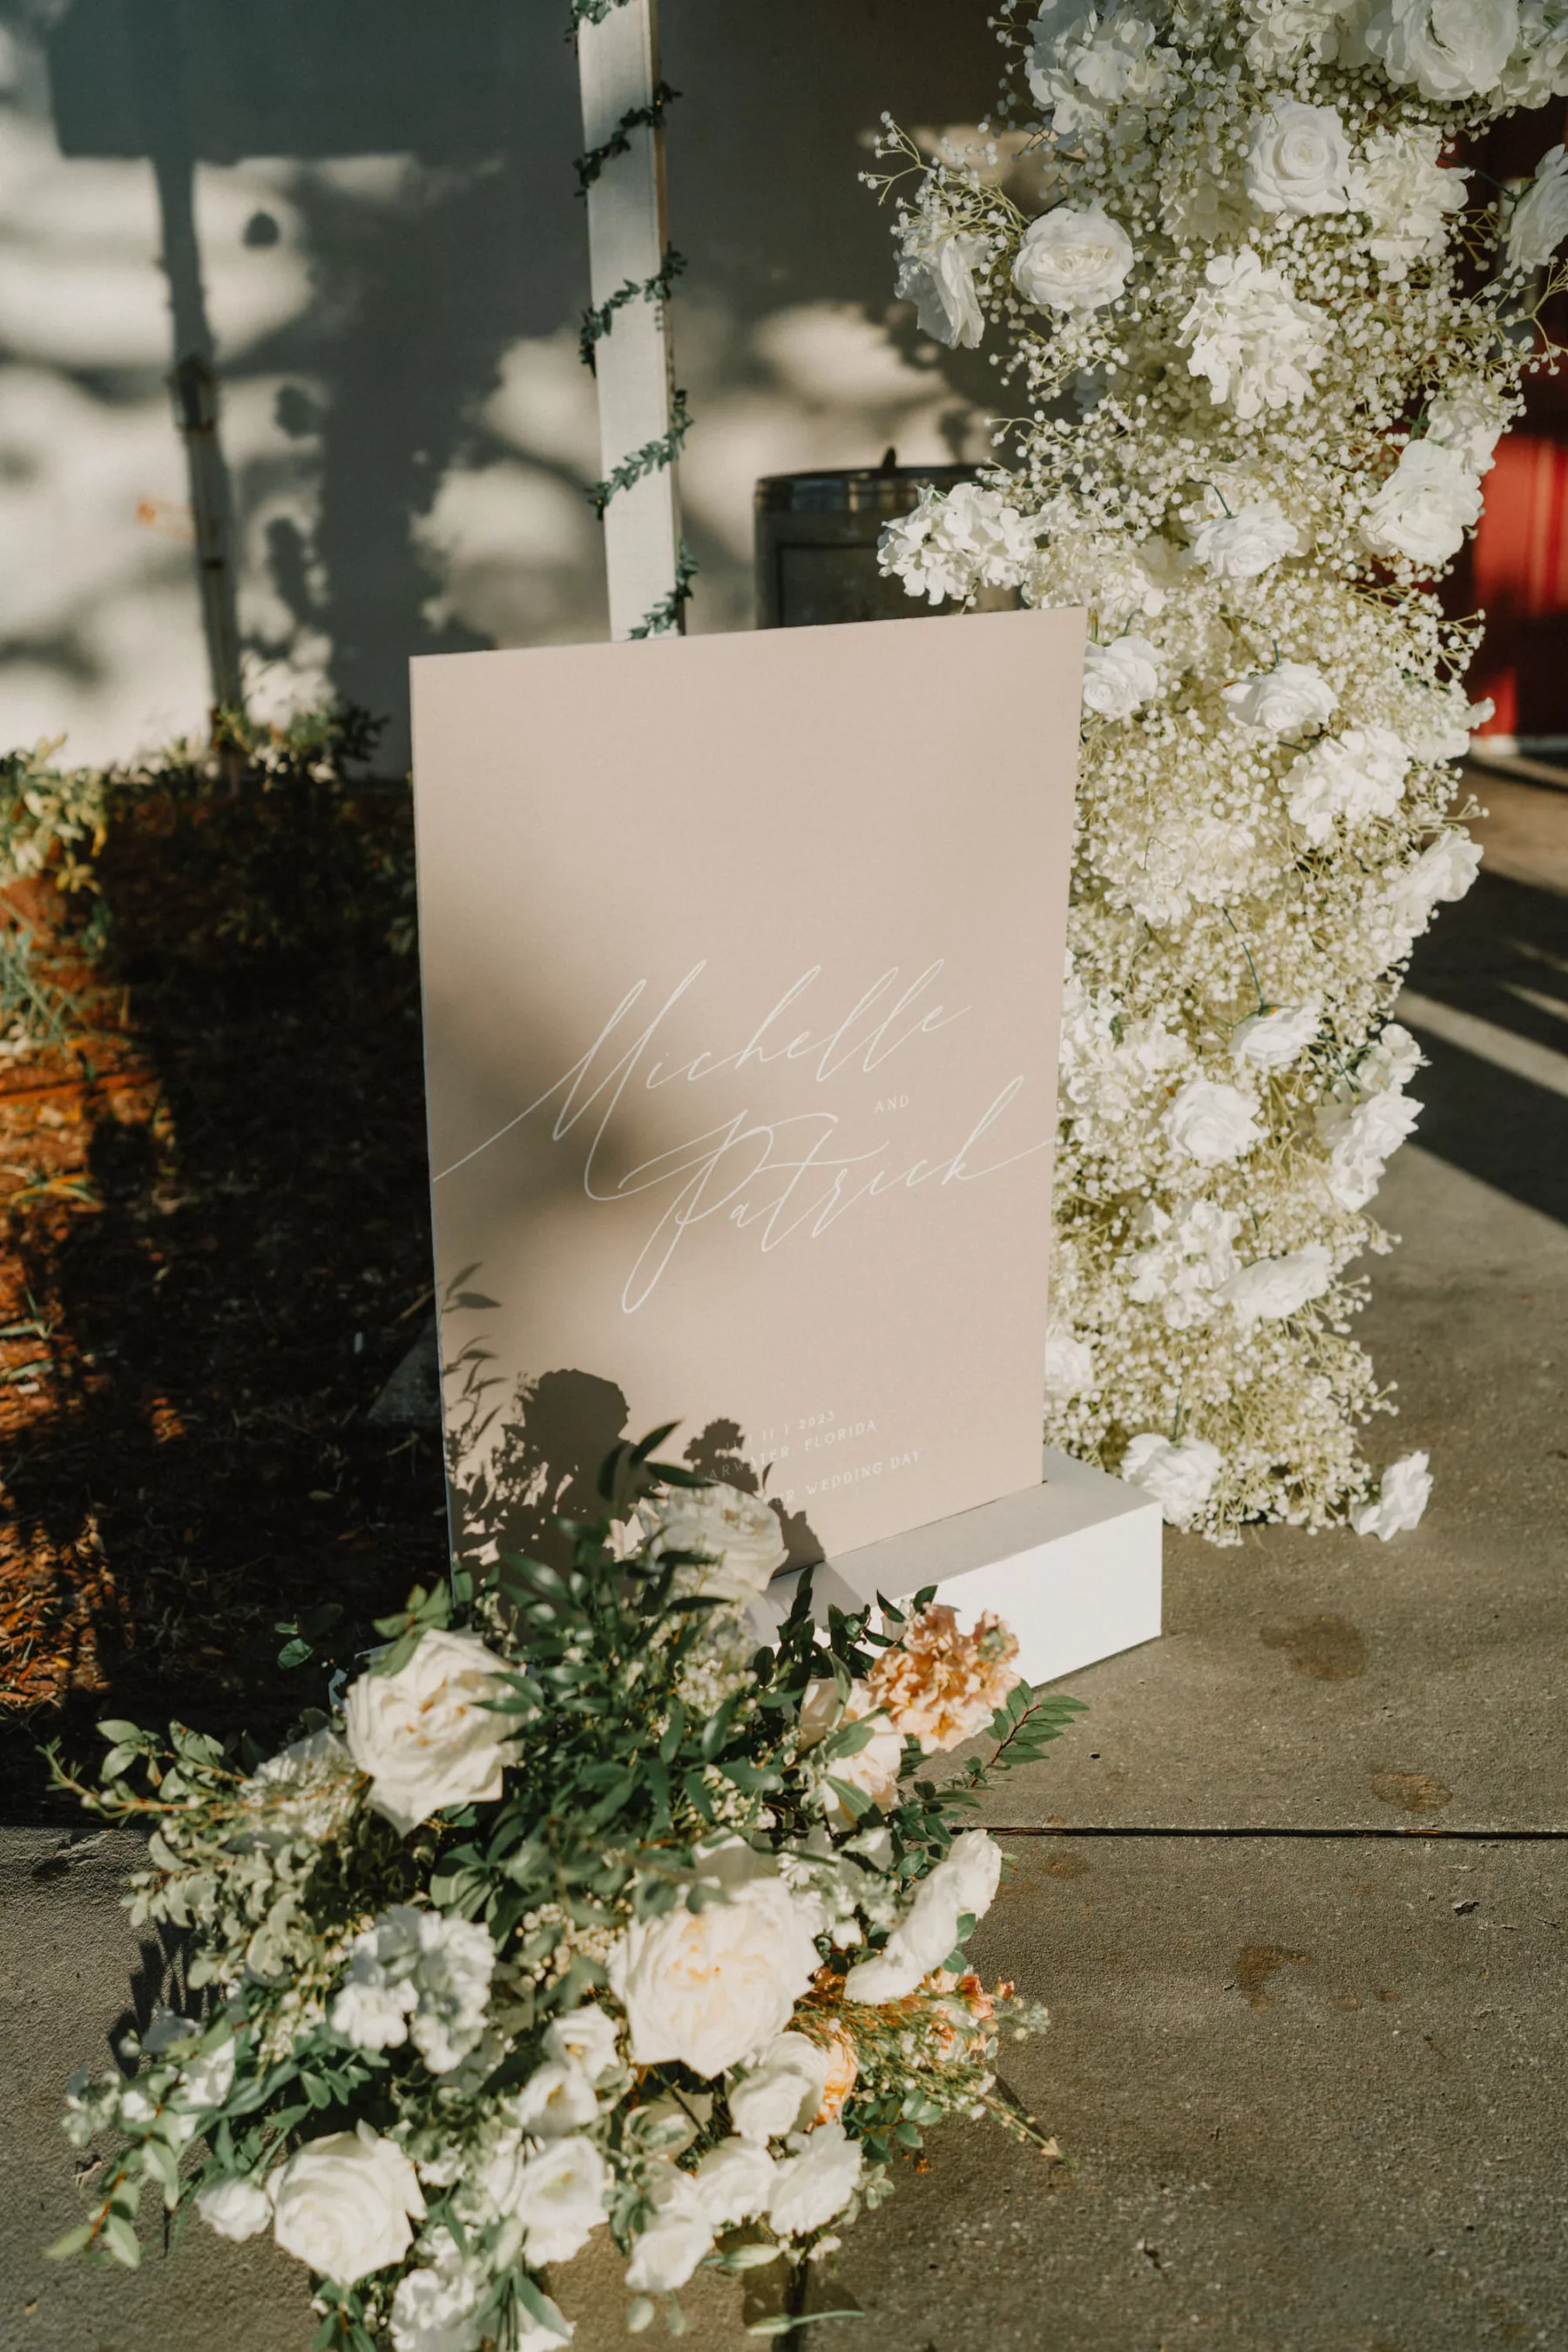 Neutral White and Champagne Wedding Sign Ideas | White Roses, Pink Carnation, and Baby's Breath Floral Arrangement